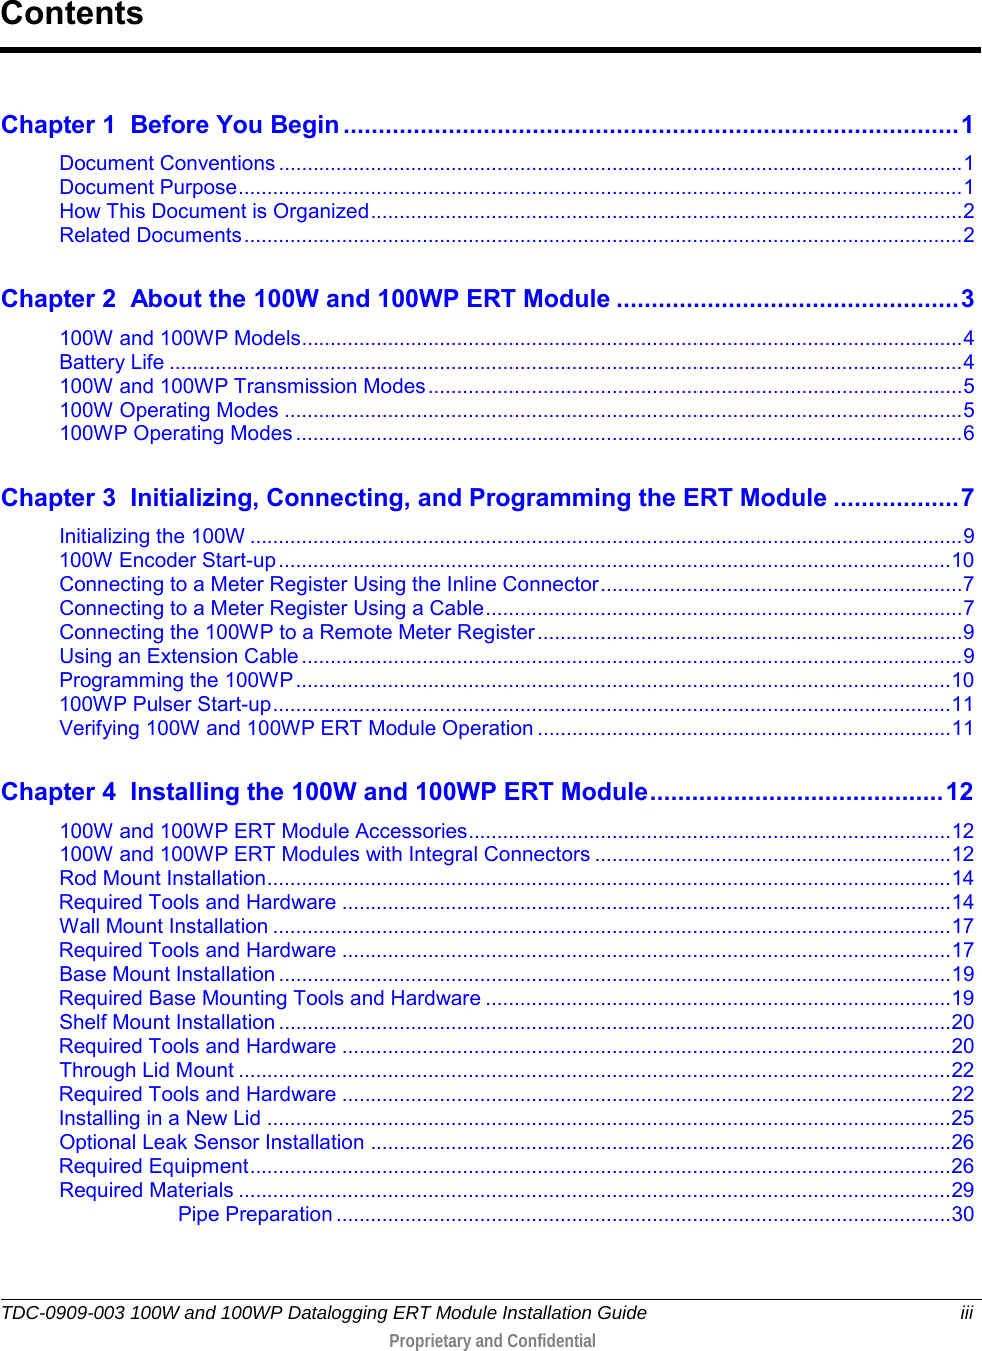  TDC-0909-003 100W and 100WP Datalogging ERT Module Installation Guide iii   Proprietary and Confidential     Chapter 1 Before You Begin ........................................................................................ 1 Document Conventions ....................................................................................................................... 1 Document Purpose .............................................................................................................................. 1 How This Document is Organized ....................................................................................................... 2 Related Documents ............................................................................................................................. 2 Chapter 2 About the 100W and 100WP ERT Module ................................................. 3 100W and 100WP Models ................................................................................................................... 4 Battery Life .......................................................................................................................................... 4 100W and 100WP Transmission Modes ............................................................................................. 5 100W Operating Modes ...................................................................................................................... 5 100WP Operating Modes .................................................................................................................... 6 Chapter 3 Initializing, Connecting, and Programming the ERT Module .................. 7 Initializing the 100W ............................................................................................................................ 9 100W Encoder Start-up ..................................................................................................................... 10 Connecting to a Meter Register Using the Inline Connector ............................................................... 7 Connecting to a Meter Register Using a Cable ................................................................................... 7 Connecting the 100WP to a Remote Meter Register .......................................................................... 9 Using an Extension Cable ................................................................................................................... 9 Programming the 100WP .................................................................................................................. 10 100WP Pulser Start-up ...................................................................................................................... 11 Verifying 100W and 100WP ERT Module Operation ........................................................................ 11 Chapter 4 Installing the 100W and 100WP ERT Module .......................................... 12 100W and 100WP ERT Module Accessories .................................................................................... 12 100W and 100WP ERT Modules with Integral Connectors .............................................................. 12 Rod Mount Installation ....................................................................................................................... 14 Required Tools and Hardware .......................................................................................................... 14 Wall Mount Installation ...................................................................................................................... 17 Required Tools and Hardware .......................................................................................................... 17 Base Mount Installation ..................................................................................................................... 19 Required Base Mounting Tools and Hardware ................................................................................. 19 Shelf Mount Installation ..................................................................................................................... 20 Required Tools and Hardware .......................................................................................................... 20 Through Lid Mount ............................................................................................................................ 22 Required Tools and Hardware .......................................................................................................... 22 Installing in a New Lid ....................................................................................................................... 25 Optional Leak Sensor Installation ..................................................................................................... 26 Required Equipment .......................................................................................................................... 26 Required Materials ............................................................................................................................ 29 Pipe Preparation ........................................................................................................... 30 Contents 